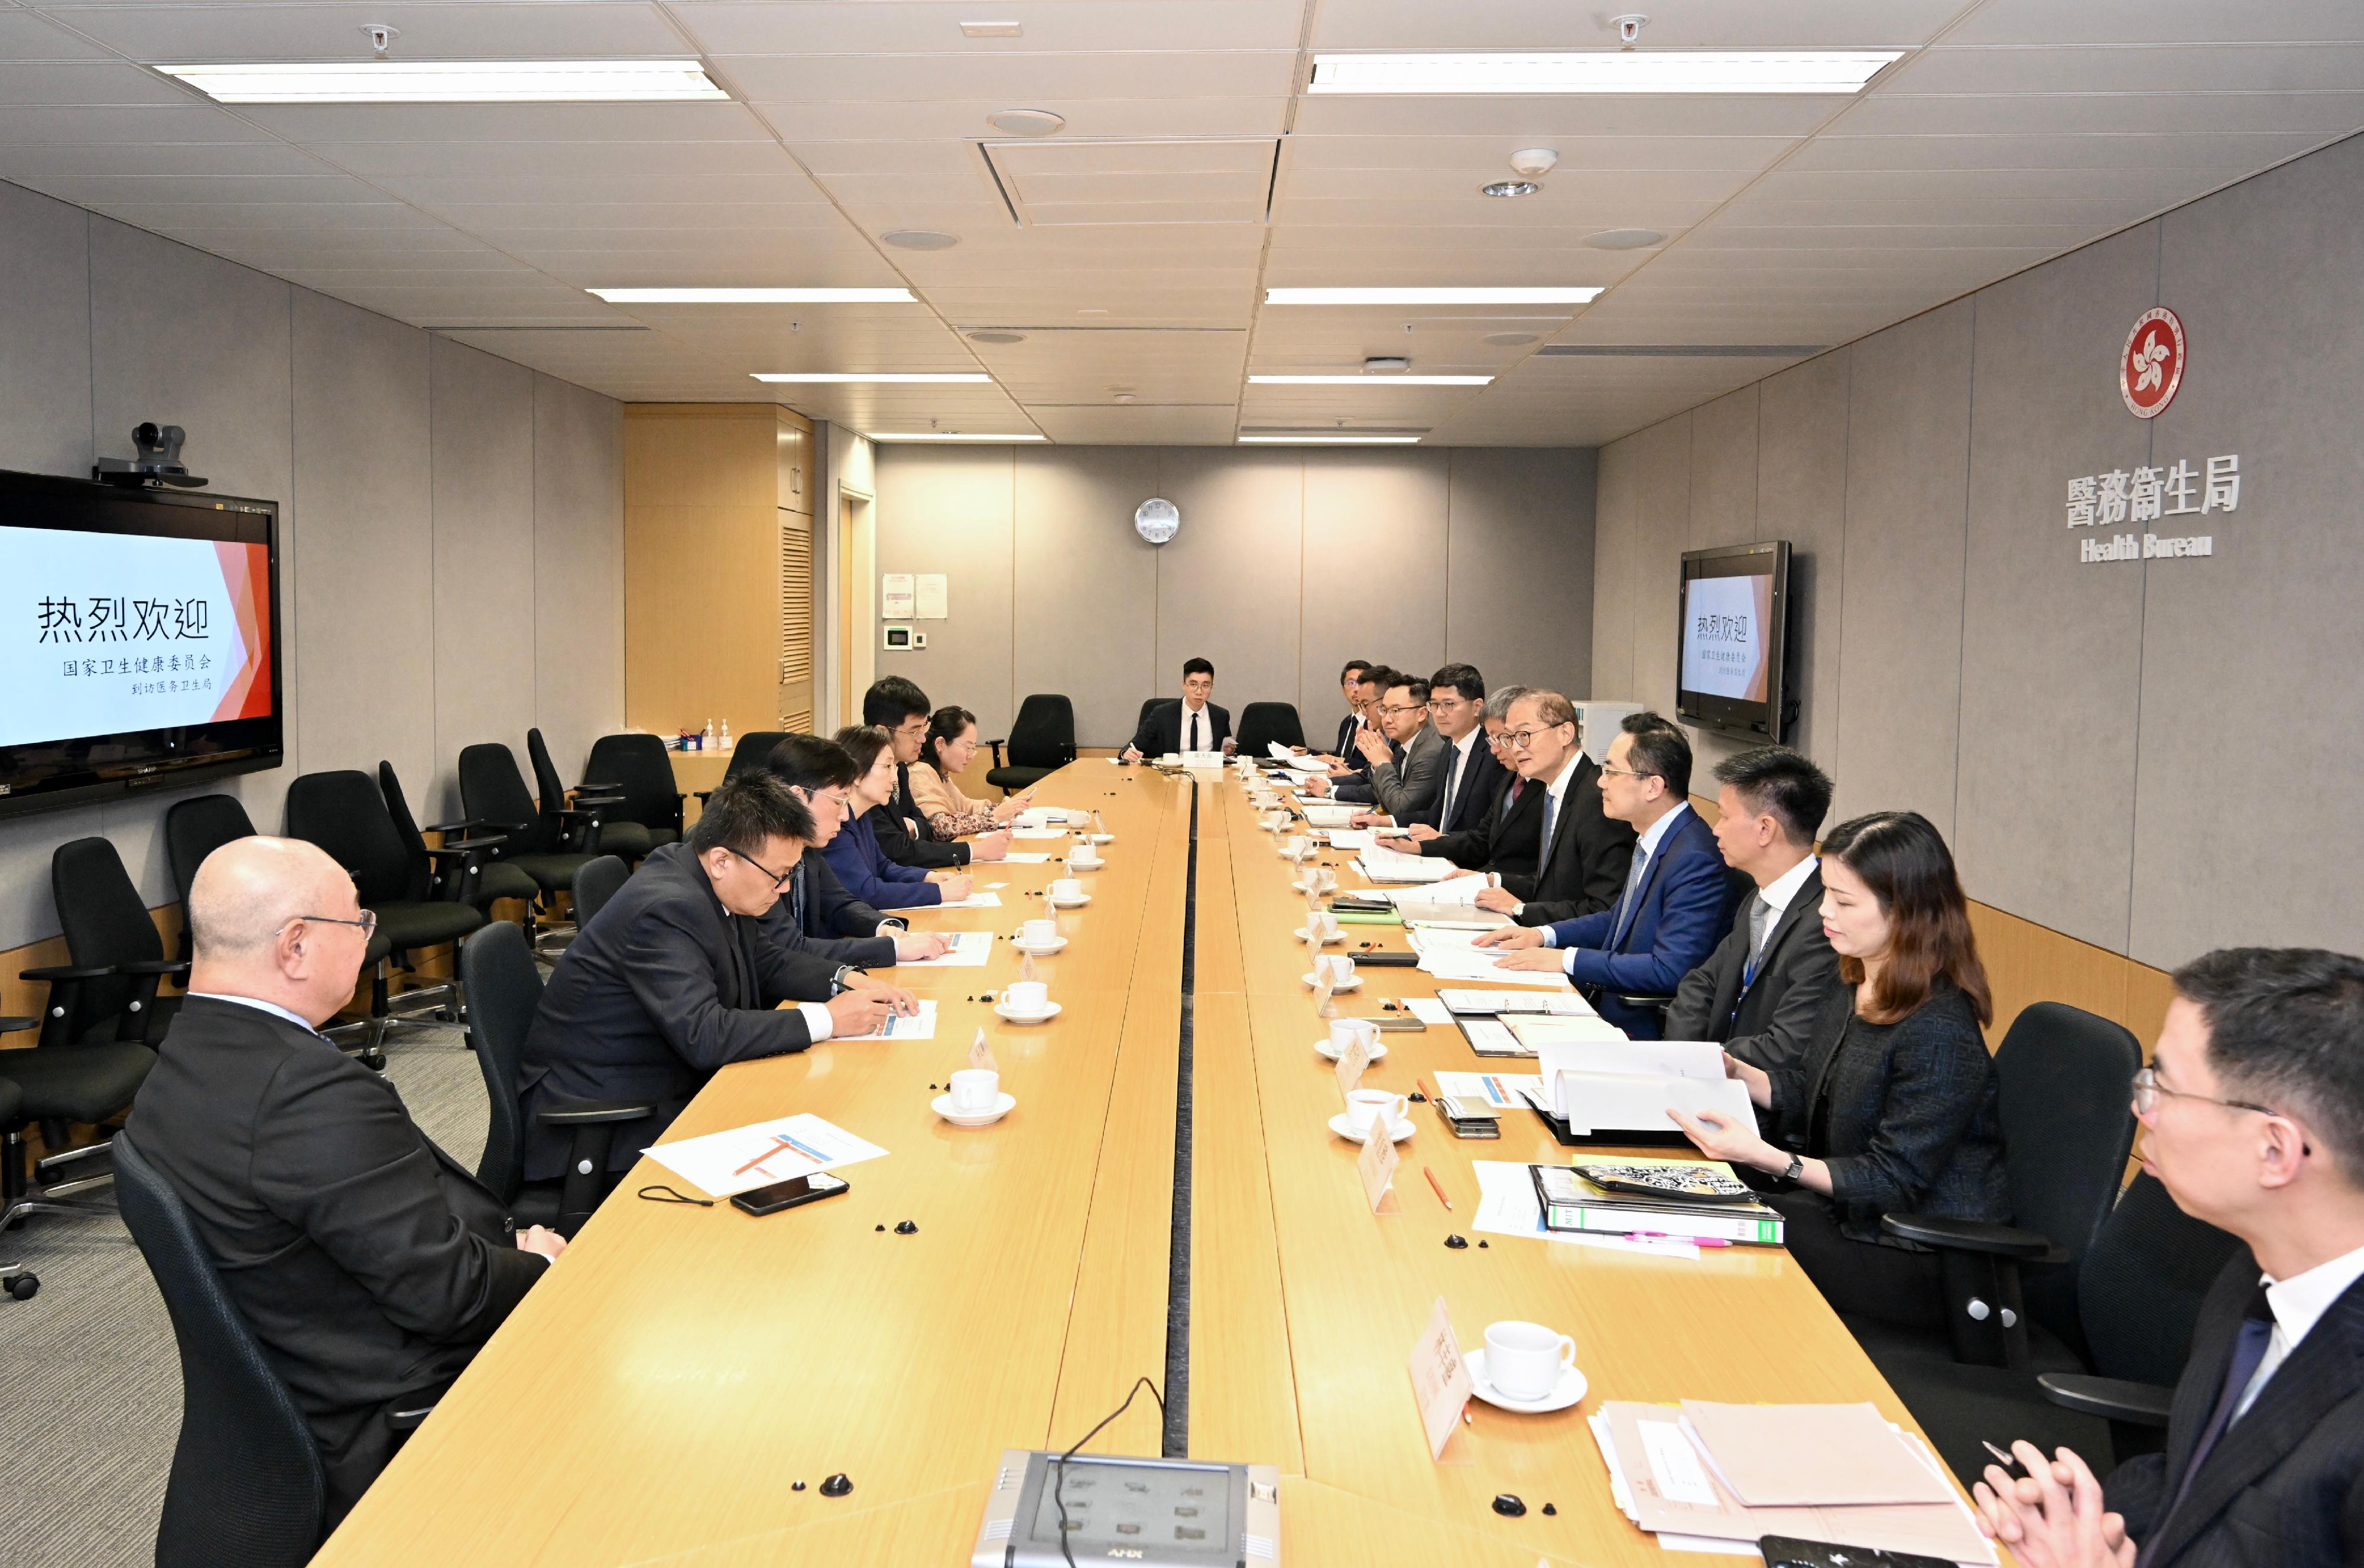 The Secretary for Health, Professor Lo Chung-mau (fifth right), met with a delegation led by the Director General of the Office of Hong Kong, Macao and Taiwan Affairs of the National Health Commission, Ms Zhang Yang (fourth left), today (September 12). The Permanent Secretary for Health, Mr Thomas Chan (sixth right); the Director of Health, Dr Ronald Lam (fourth right); and the Chief Executive of the Hospital Authority, Dr Tony Ko (seventh right), also attended.